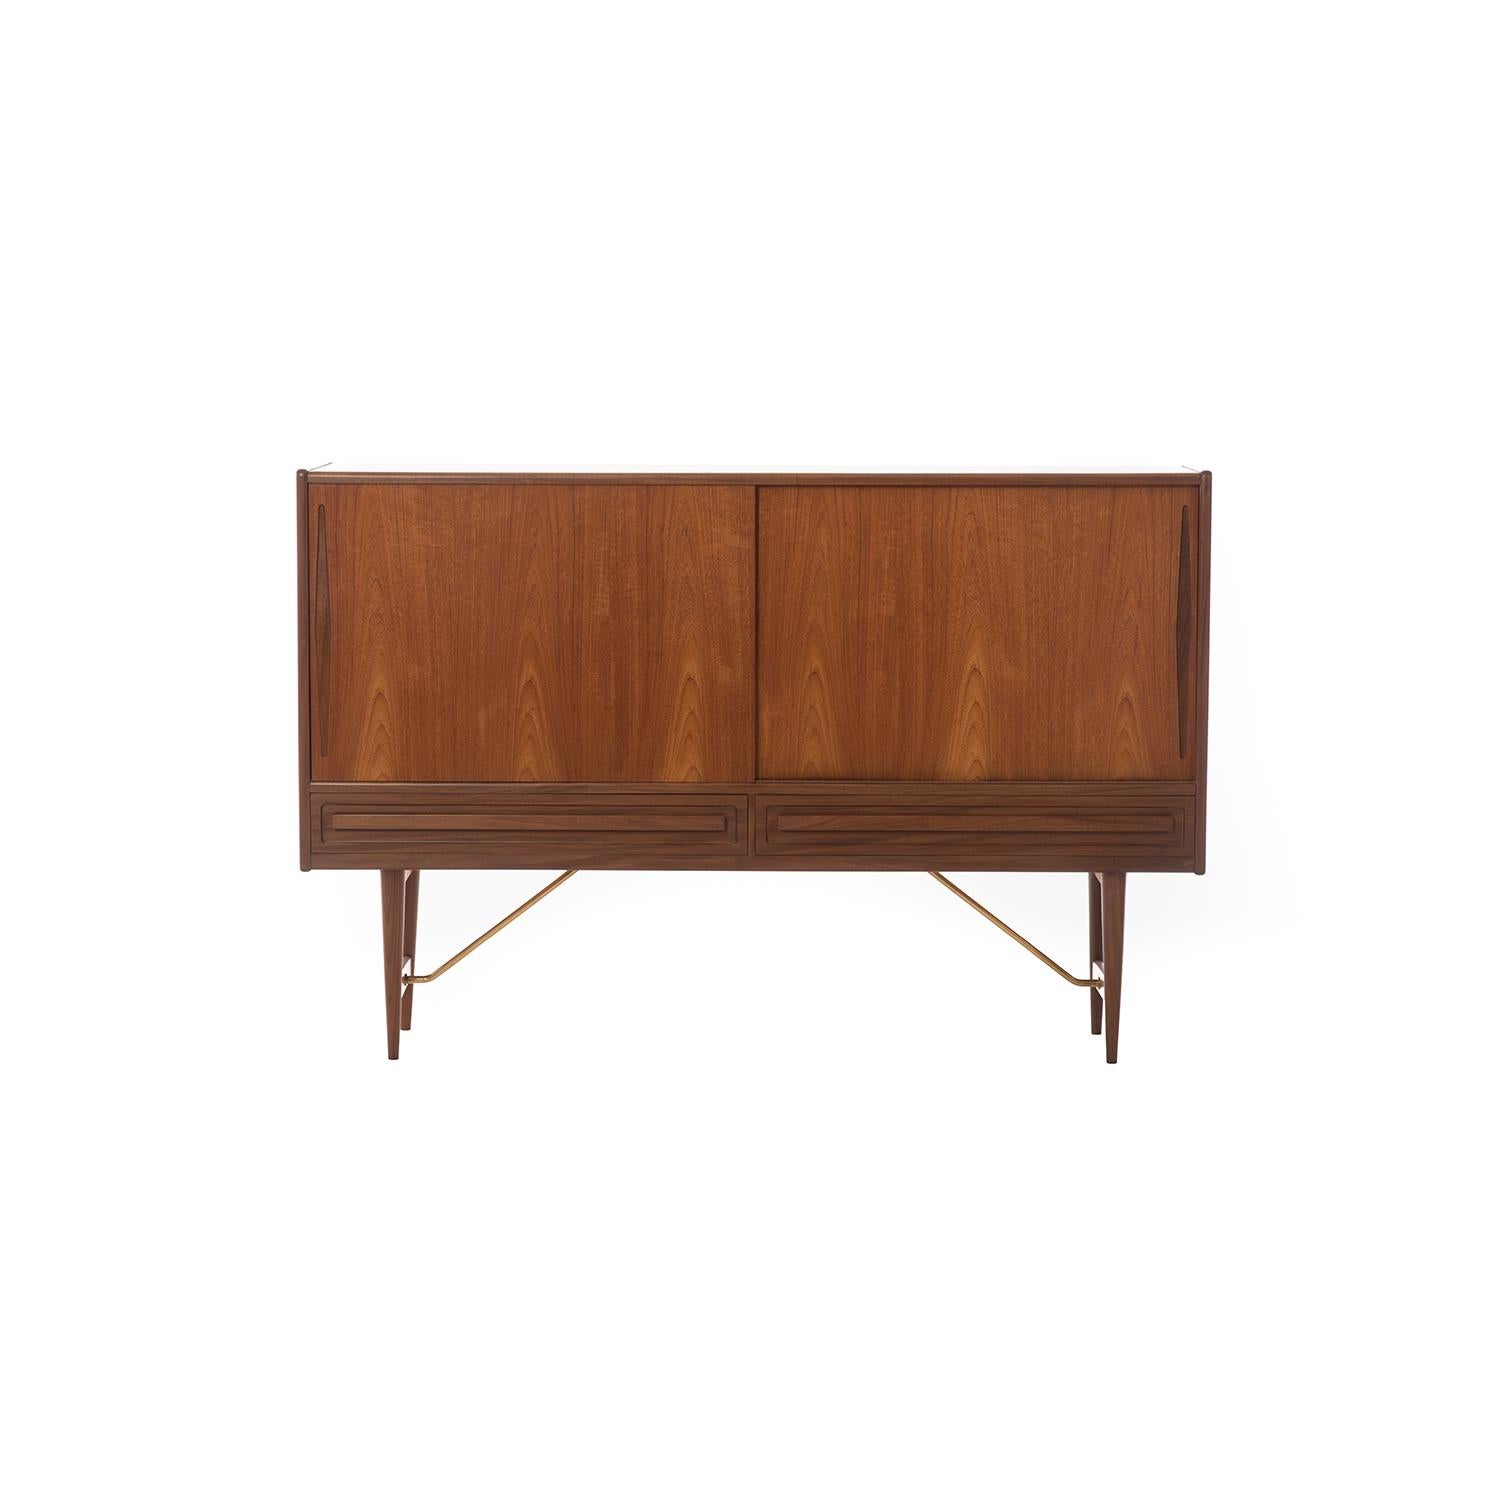 Danish modern old growth teak sideboard with brass hardware. Features adjustable shelves, five silver drawers, and two larger linen drawers.